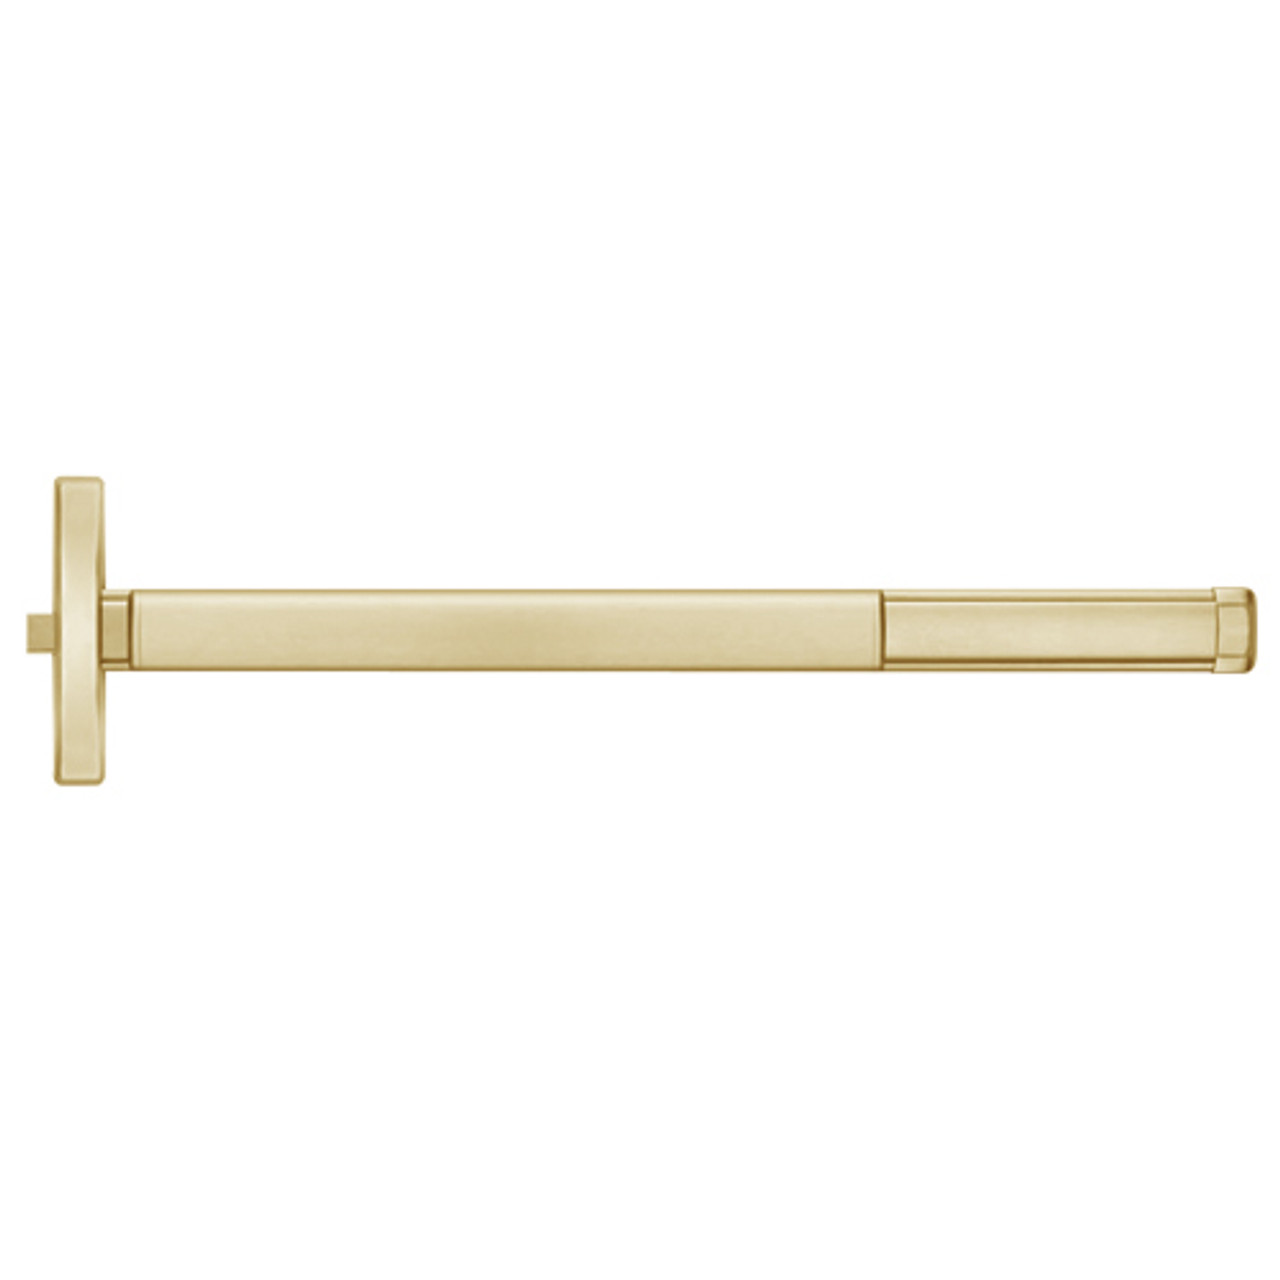 TS2401-606-48 PHI 2400 Series Non Fire Rated Apex Rim Exit Device with Touchbar Monitoring Switch Prepped for Cover Plate in Satin Brass Finish